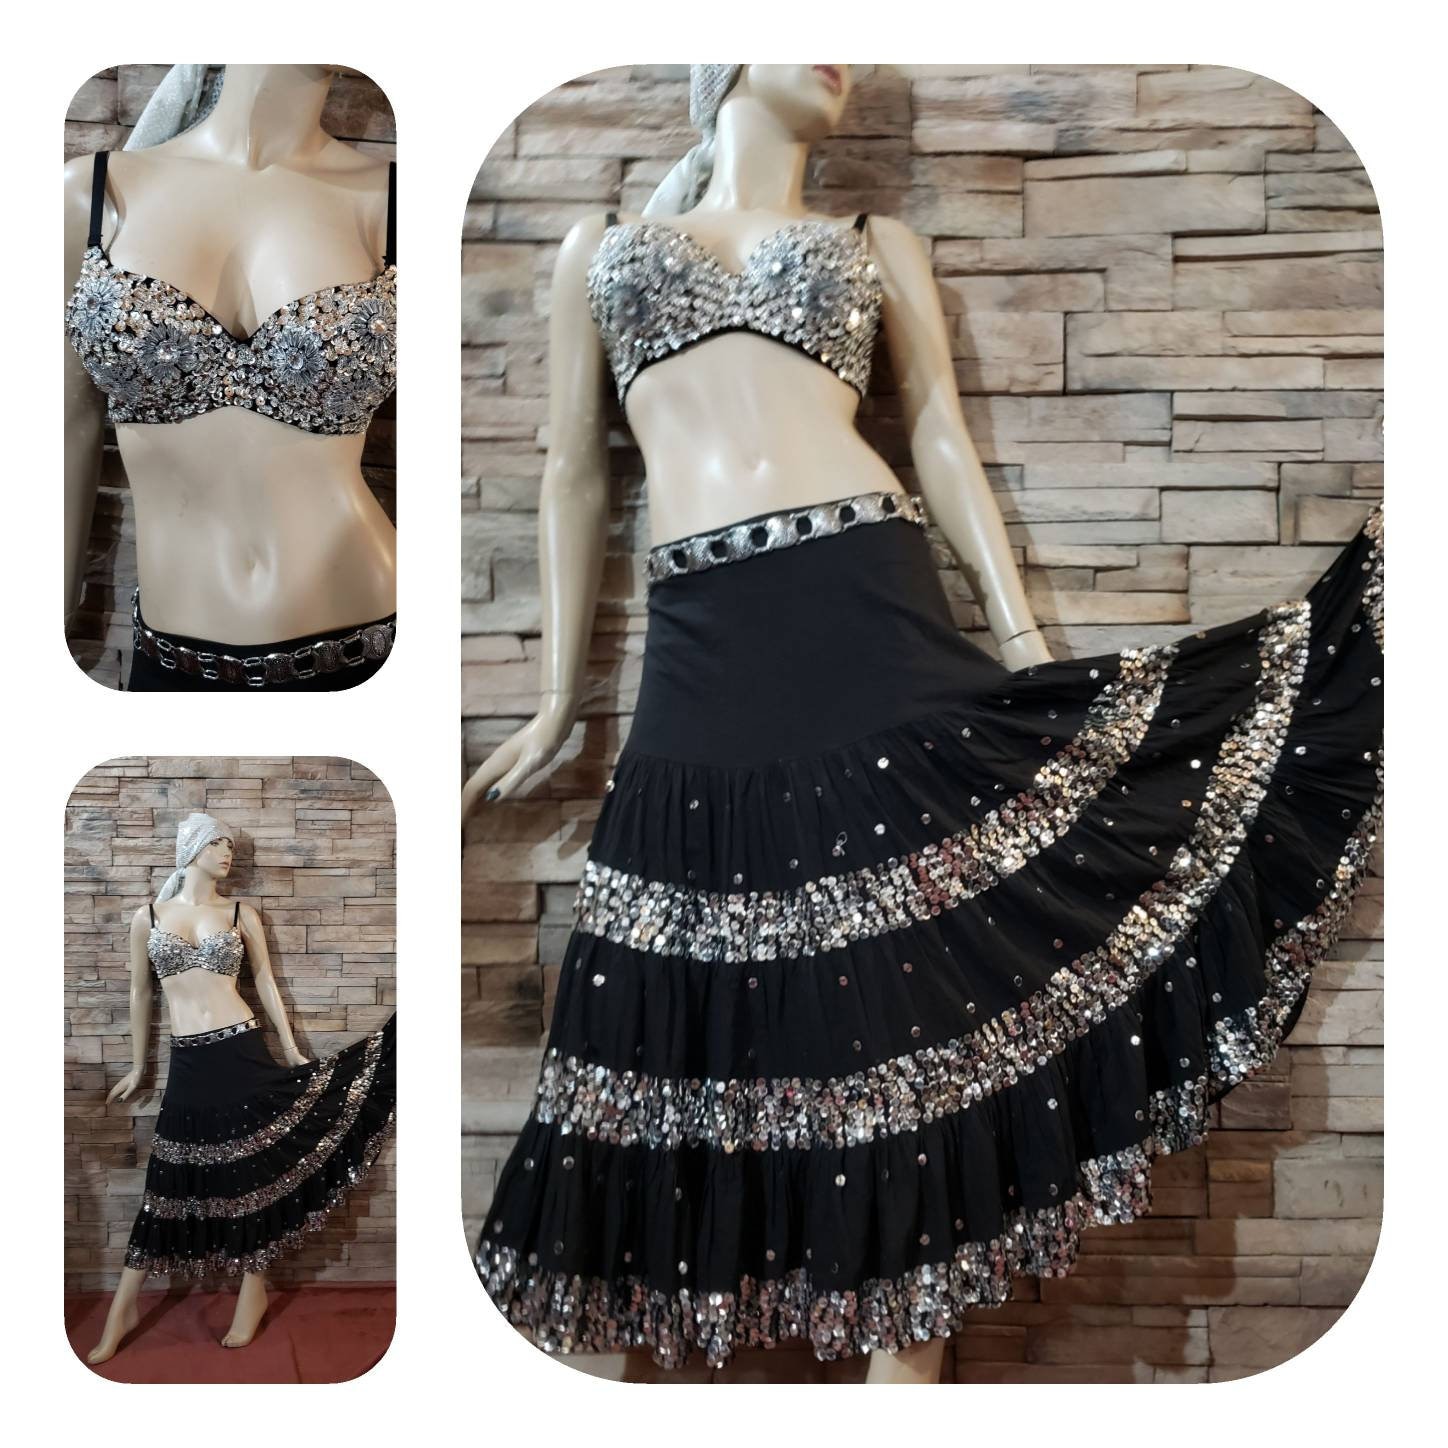 lace pleated chiffon coin Belly Dance Bra Top Costume 